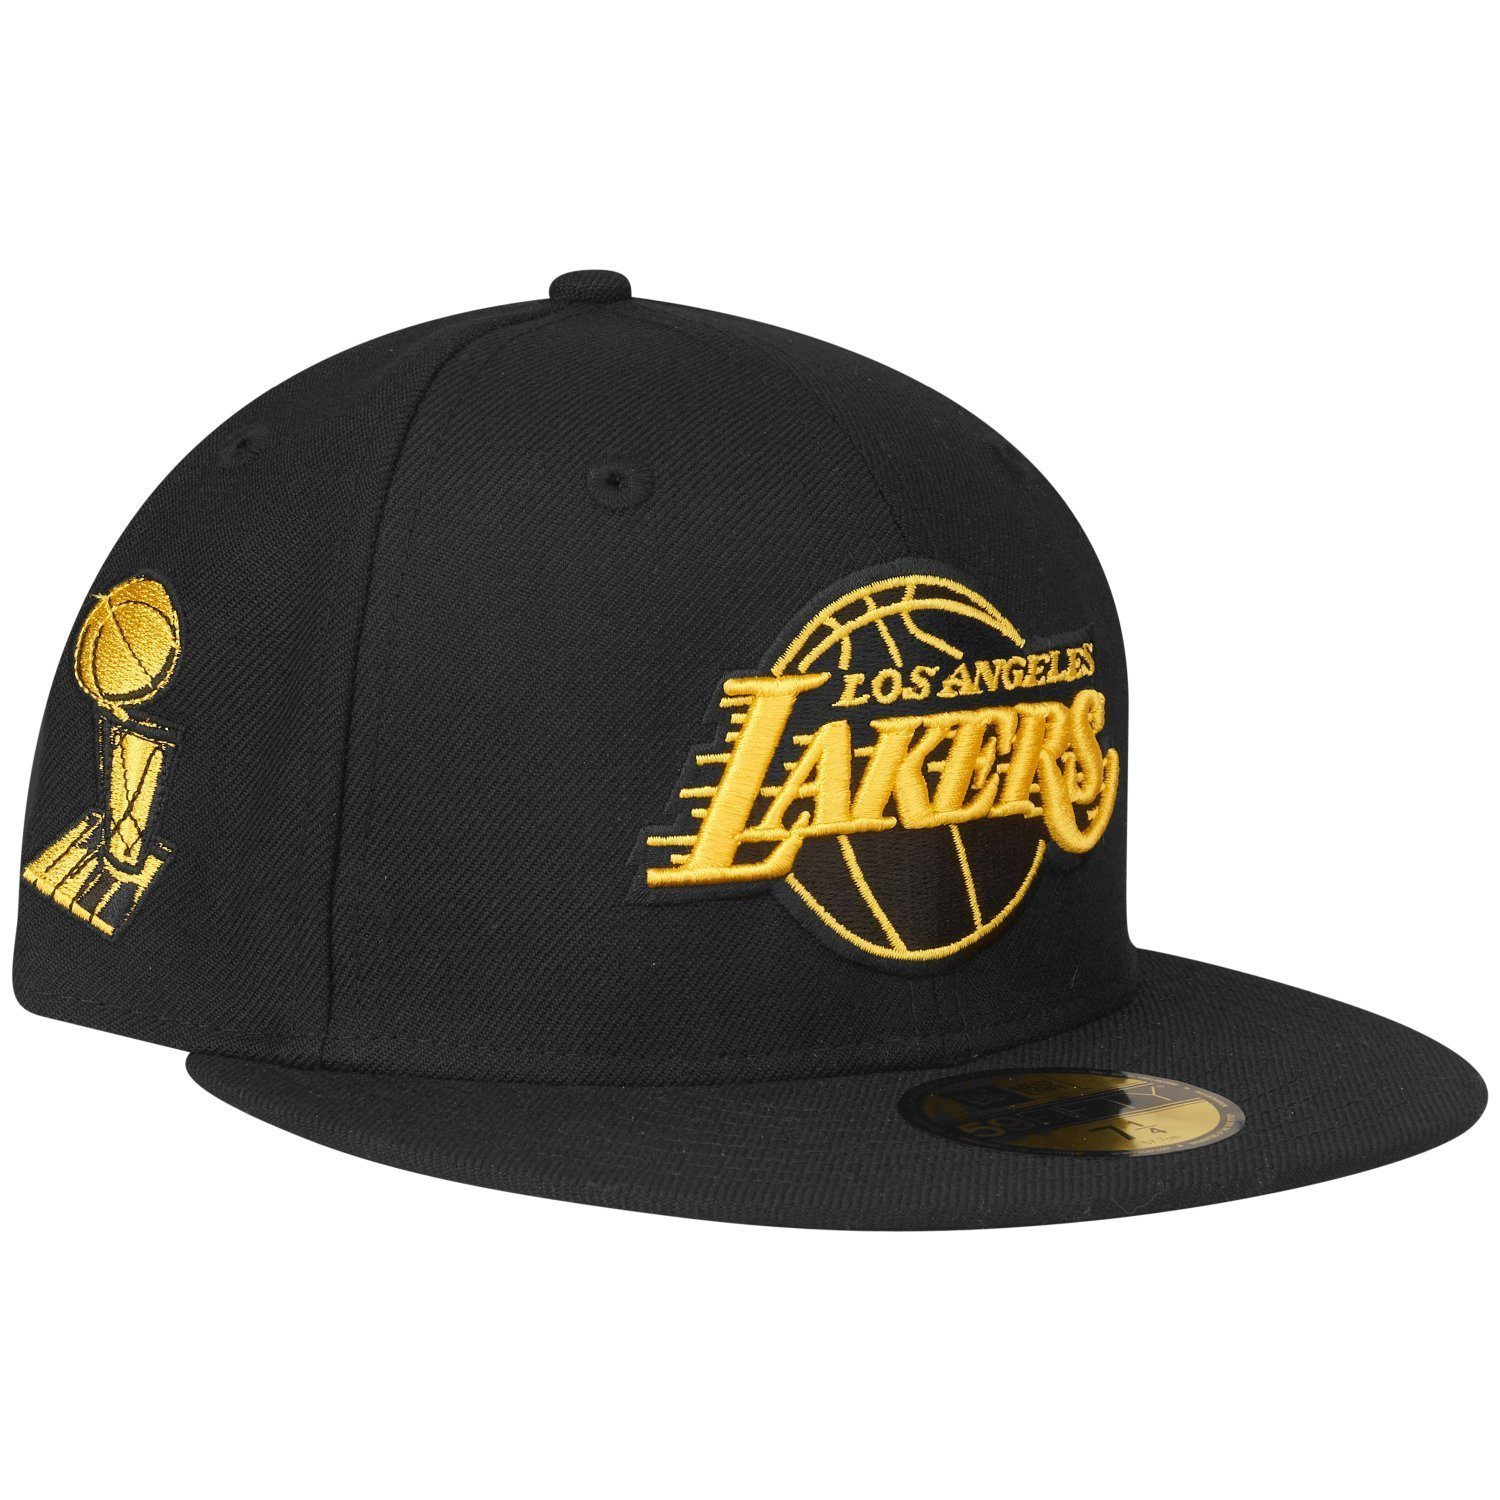 New Era Fitted Cap 59Fifty NBA CHAMPS Los Angeles Lakers | Fitted Caps